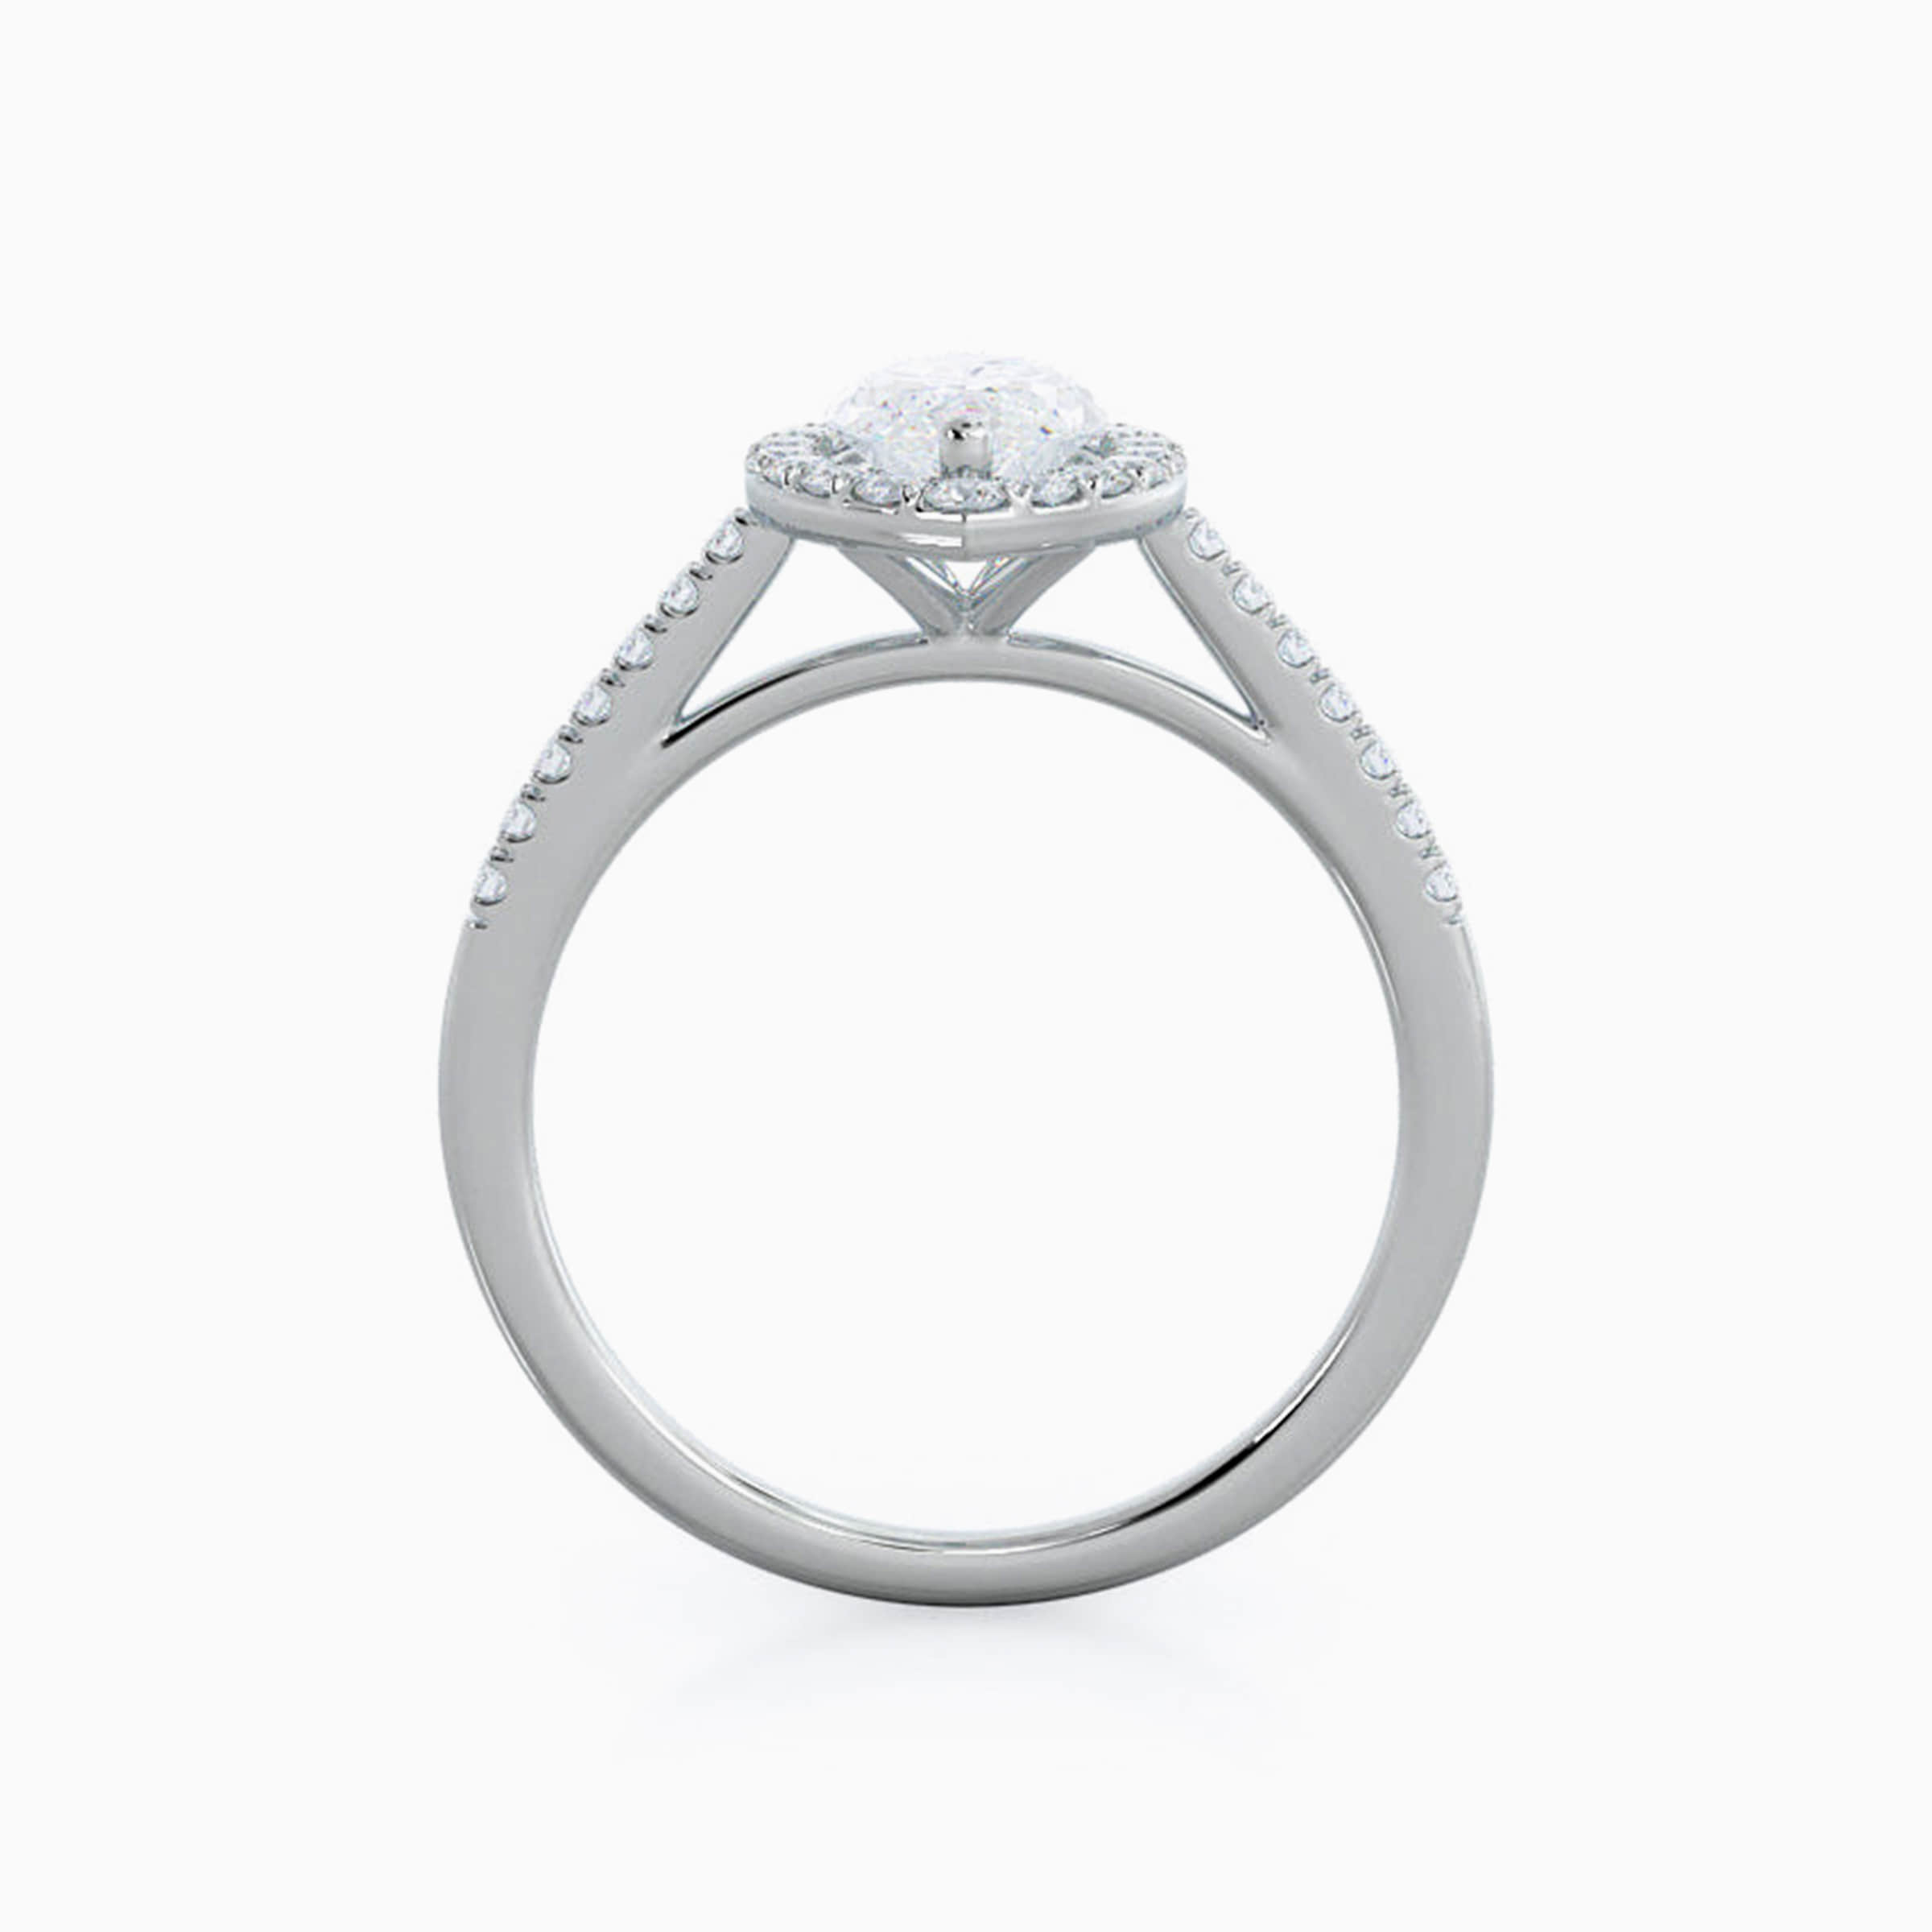 Darry Ring marquise cut engagement ring